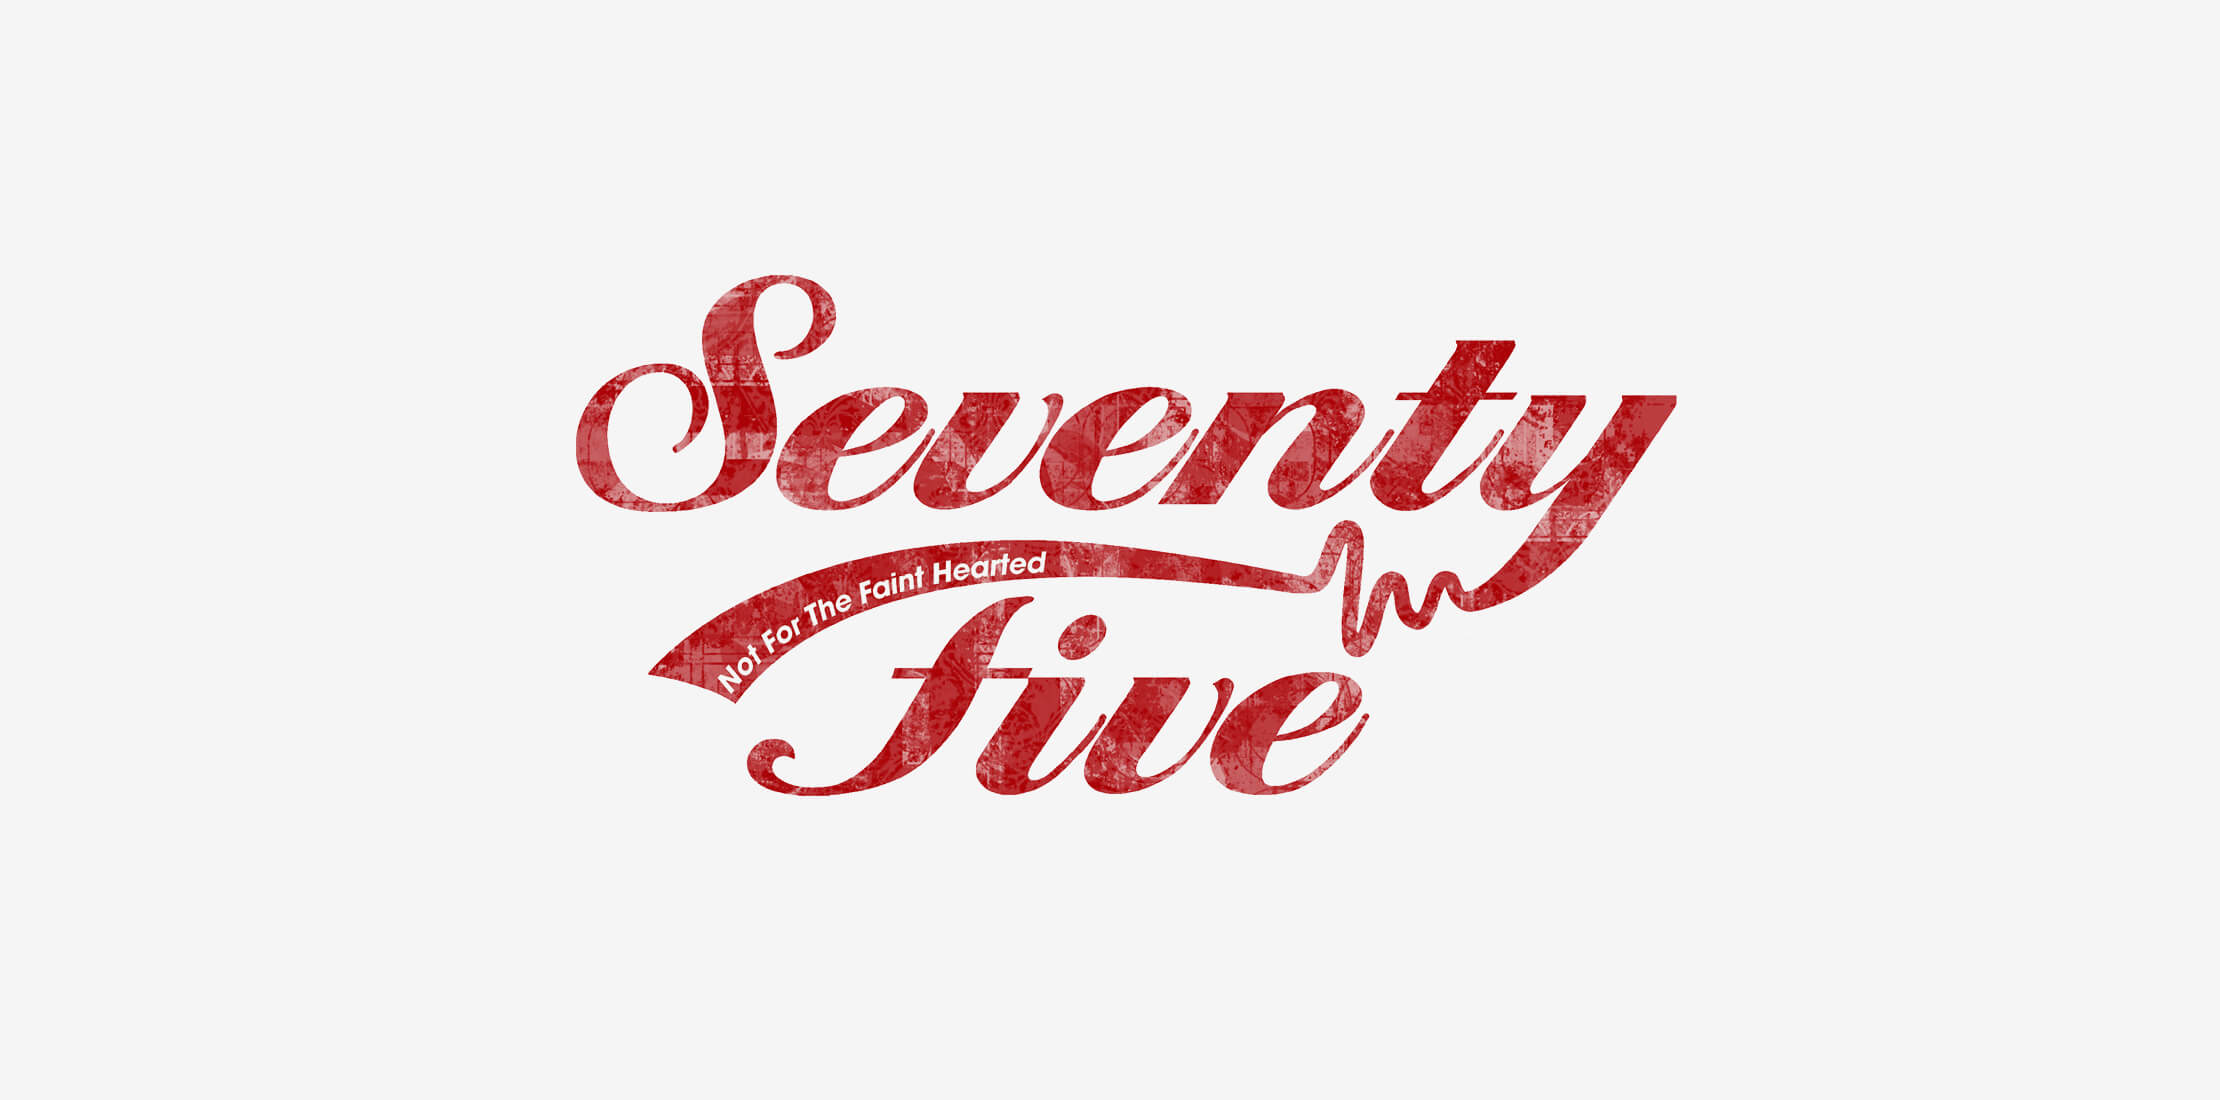 Dark red 'Seventy Five' logo on a light grey background, written in a rustic heavy script font with the tagline 'Not for the Faint Hearted' in white